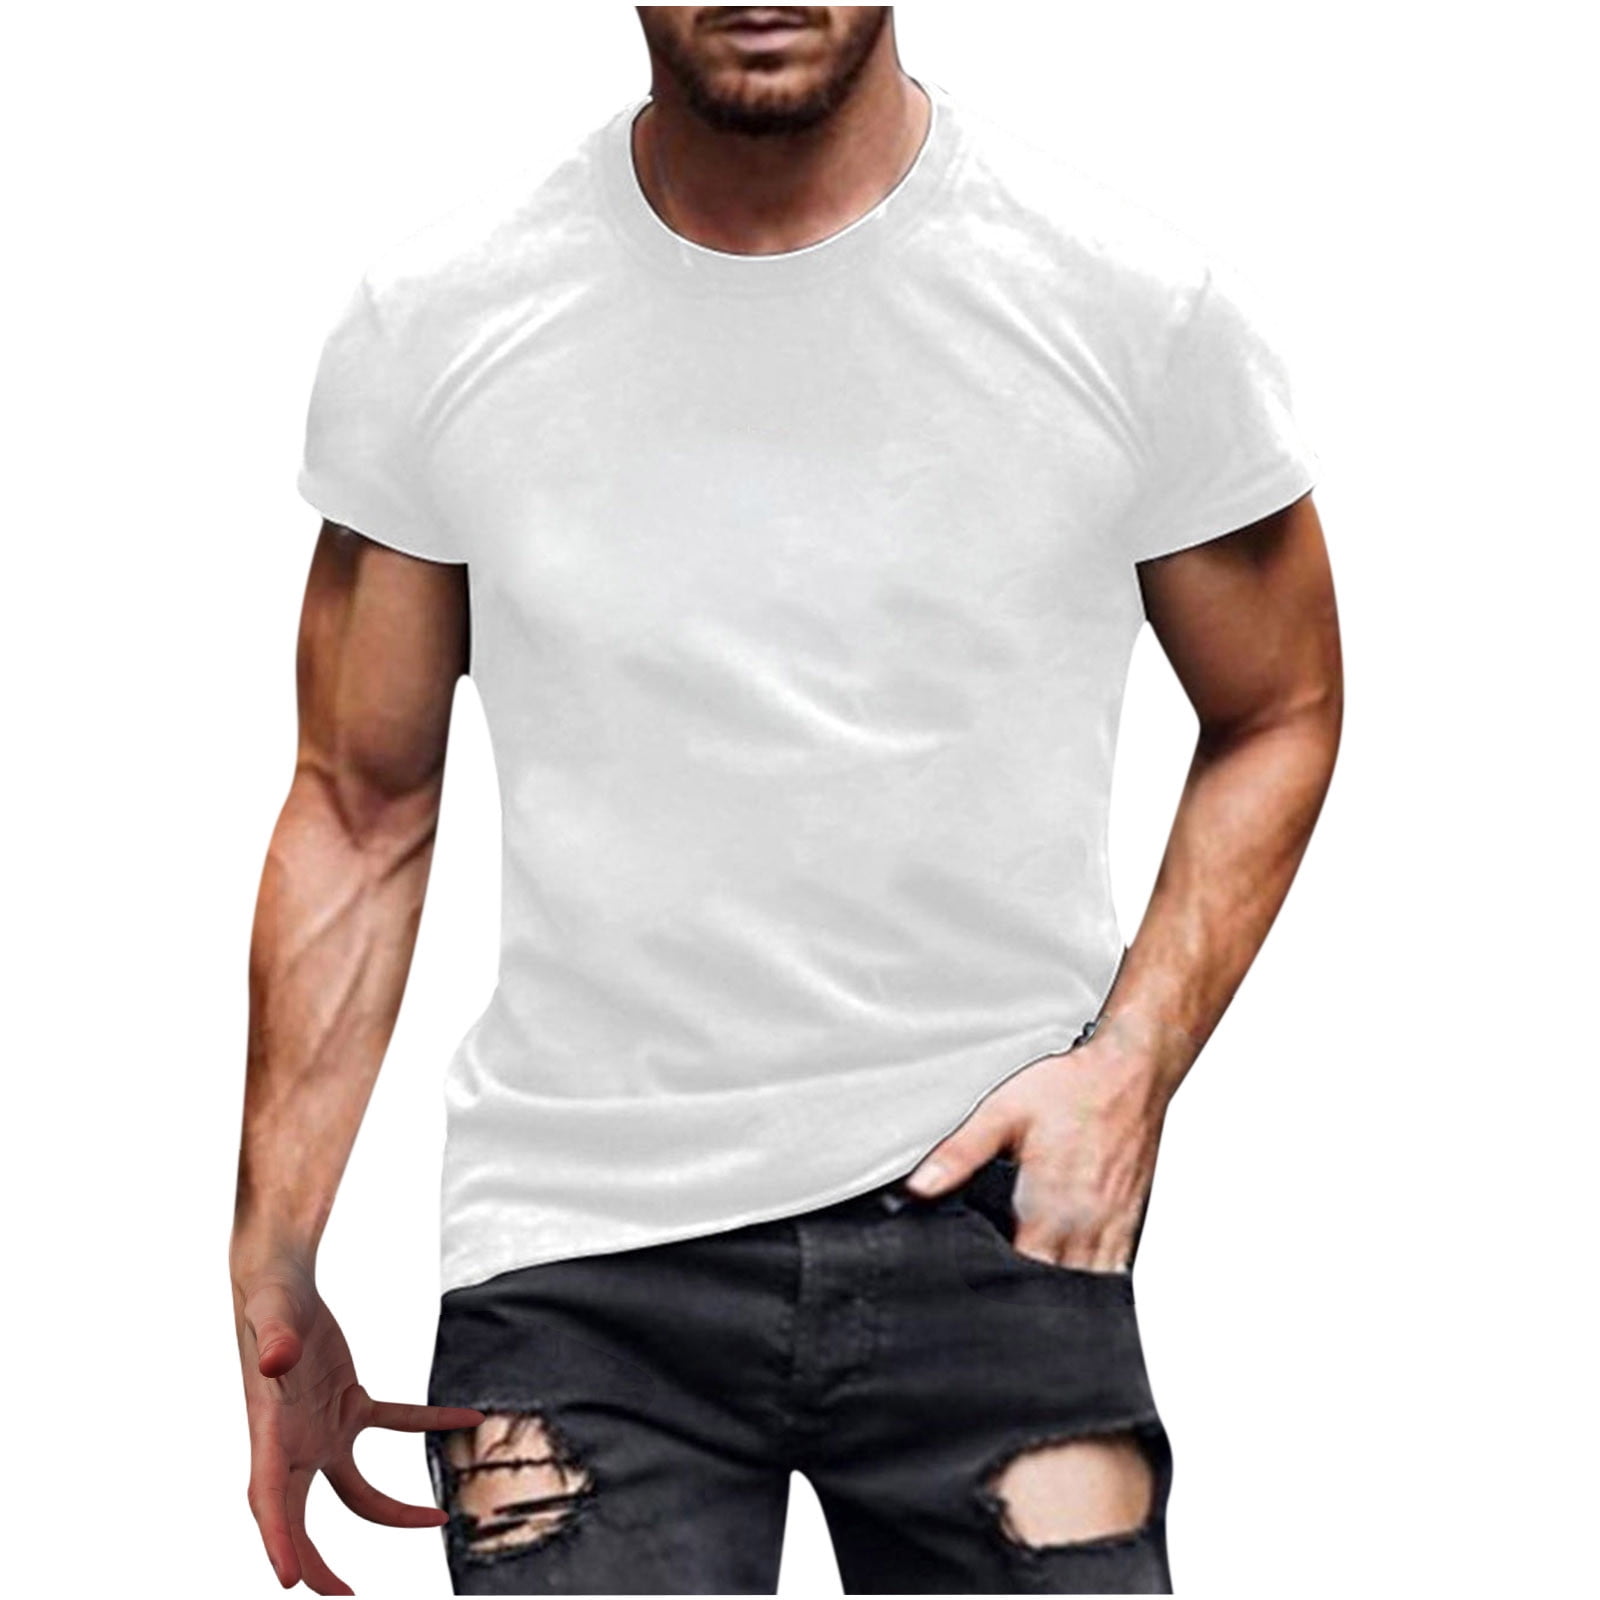 12+ Best White Tshirt Outfit Men Ideas For Casual Look In 2024